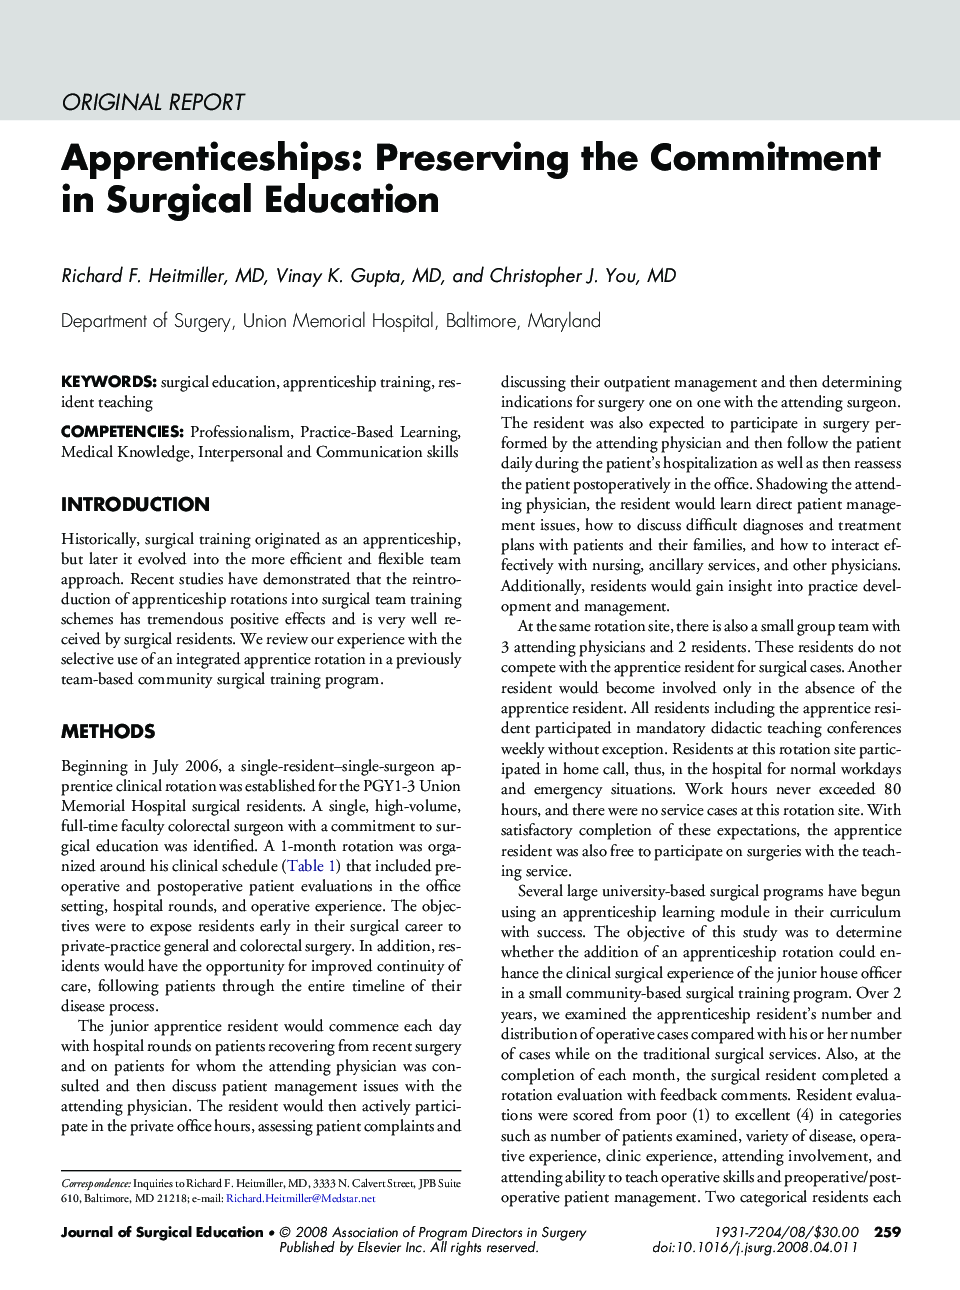 Apprenticeships: Preserving the Commitment in Surgical Education